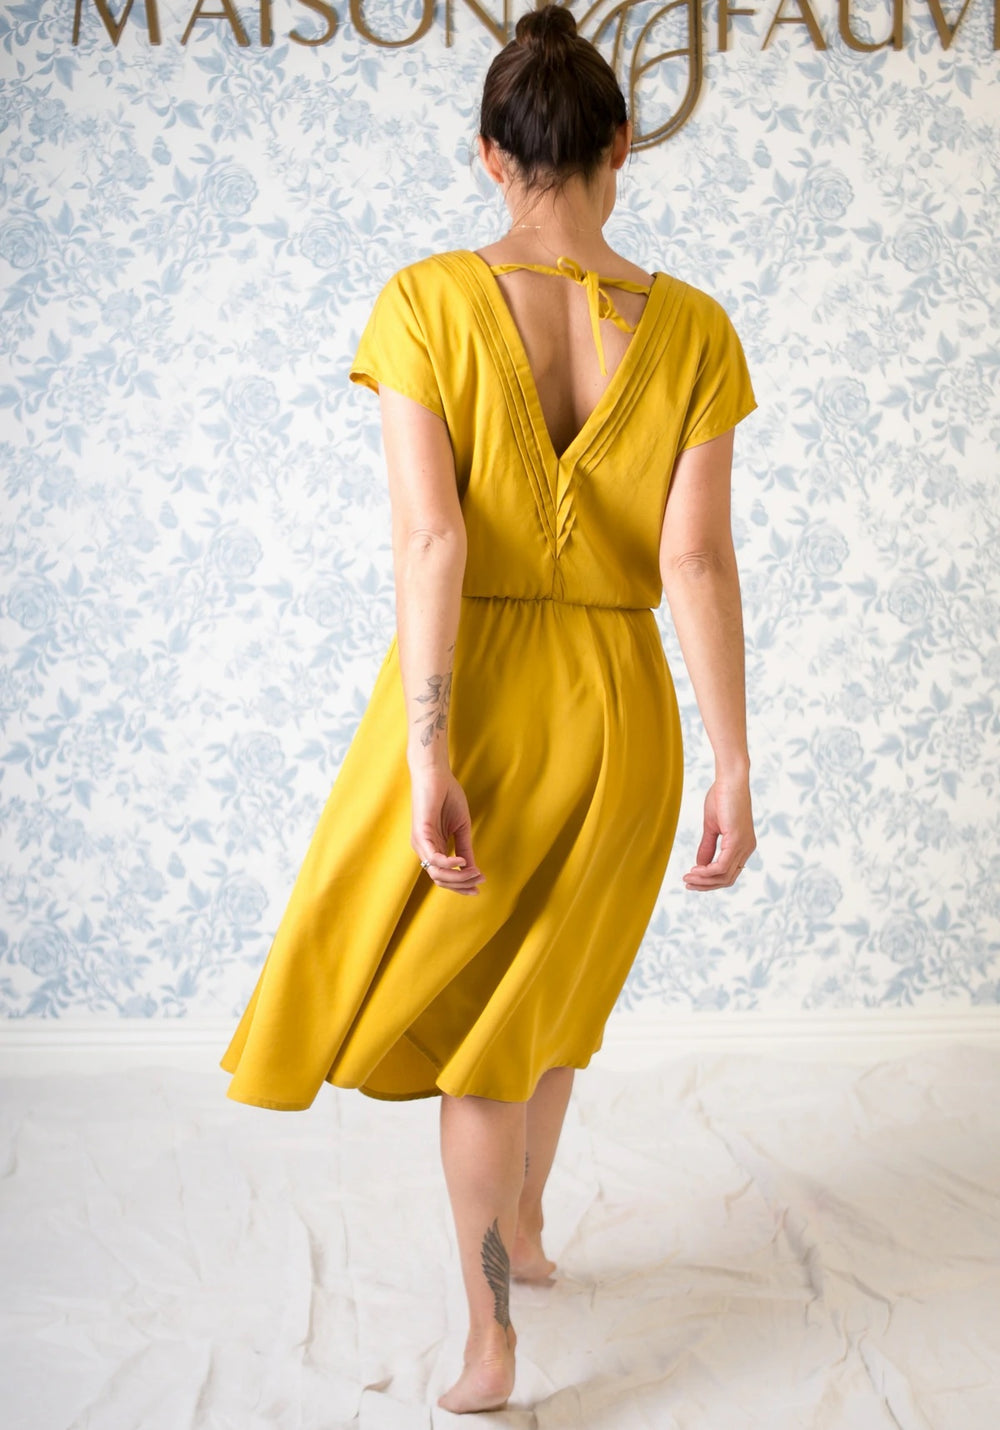 Woman wearing the Byzance Dress sewing pattern from Maison Fauve on The Fold Line. A skater dress pattern made in viscose, broderie anglaise, tencel, soft and light cotton, linen or crepe fabrics, featuring a v-neckline at the front and back emphasised by